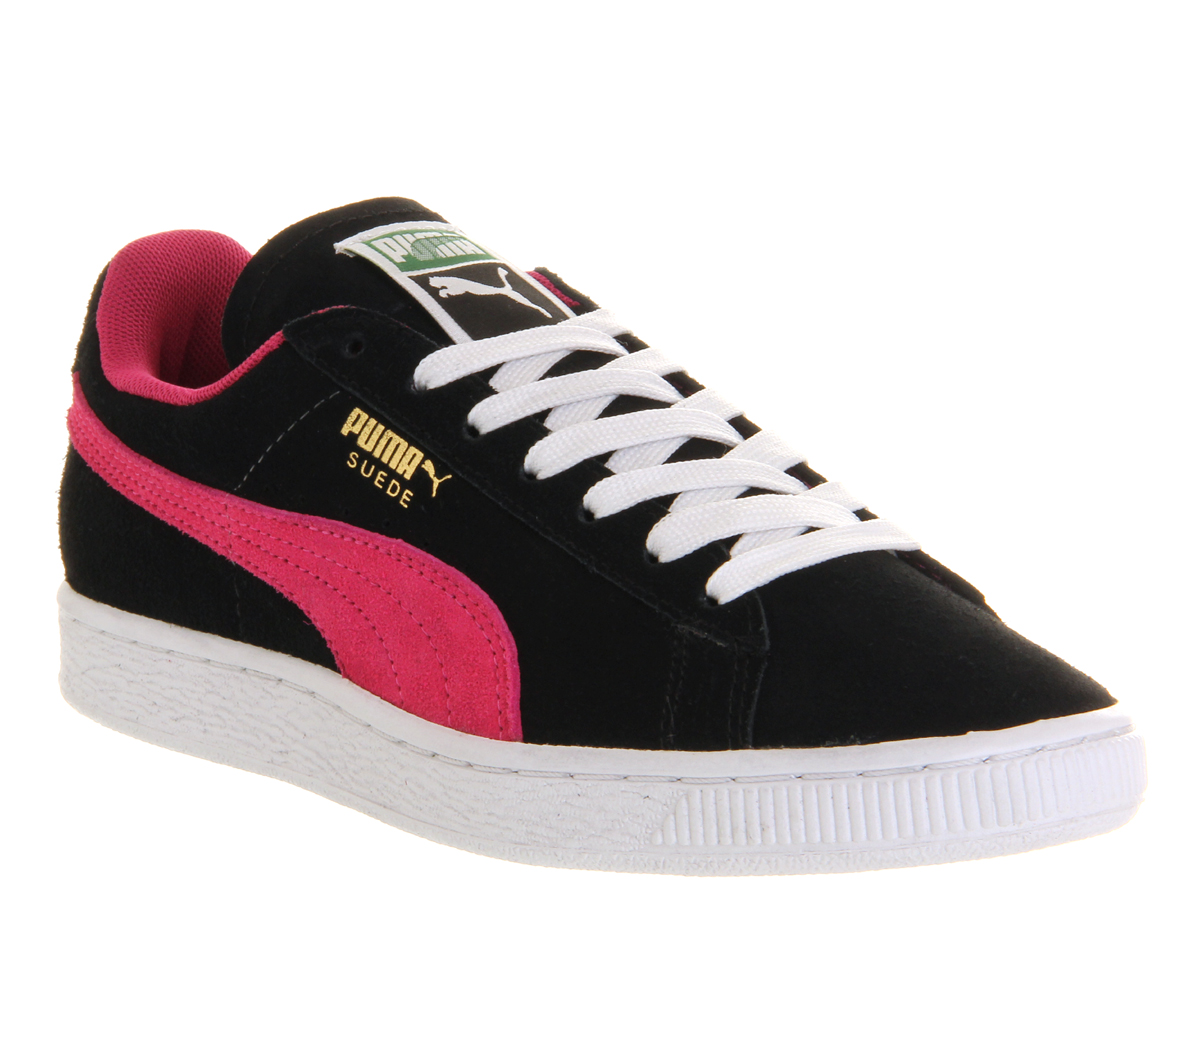 pink and purple pumas, OFF 71%,Buy!